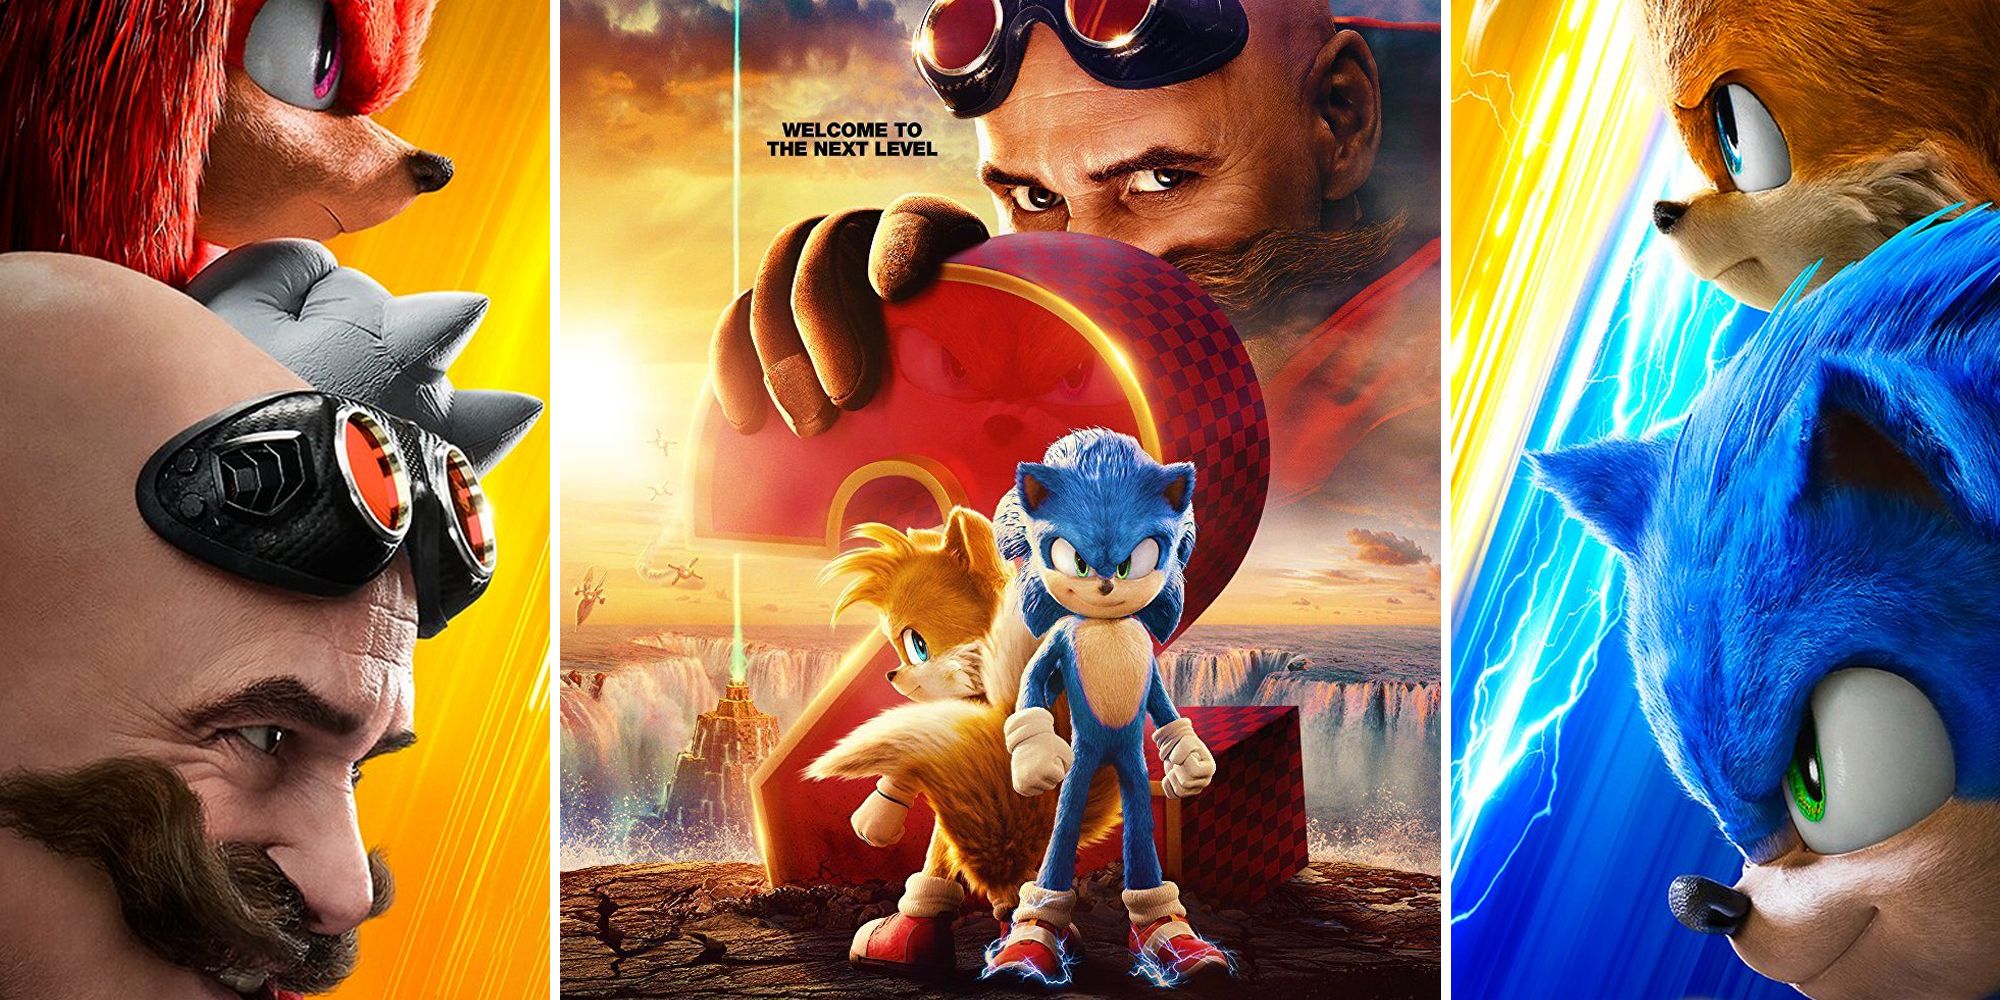 Sonic 2 Poster Hints The Sequel Is Fixing The First Movie's Game Issue